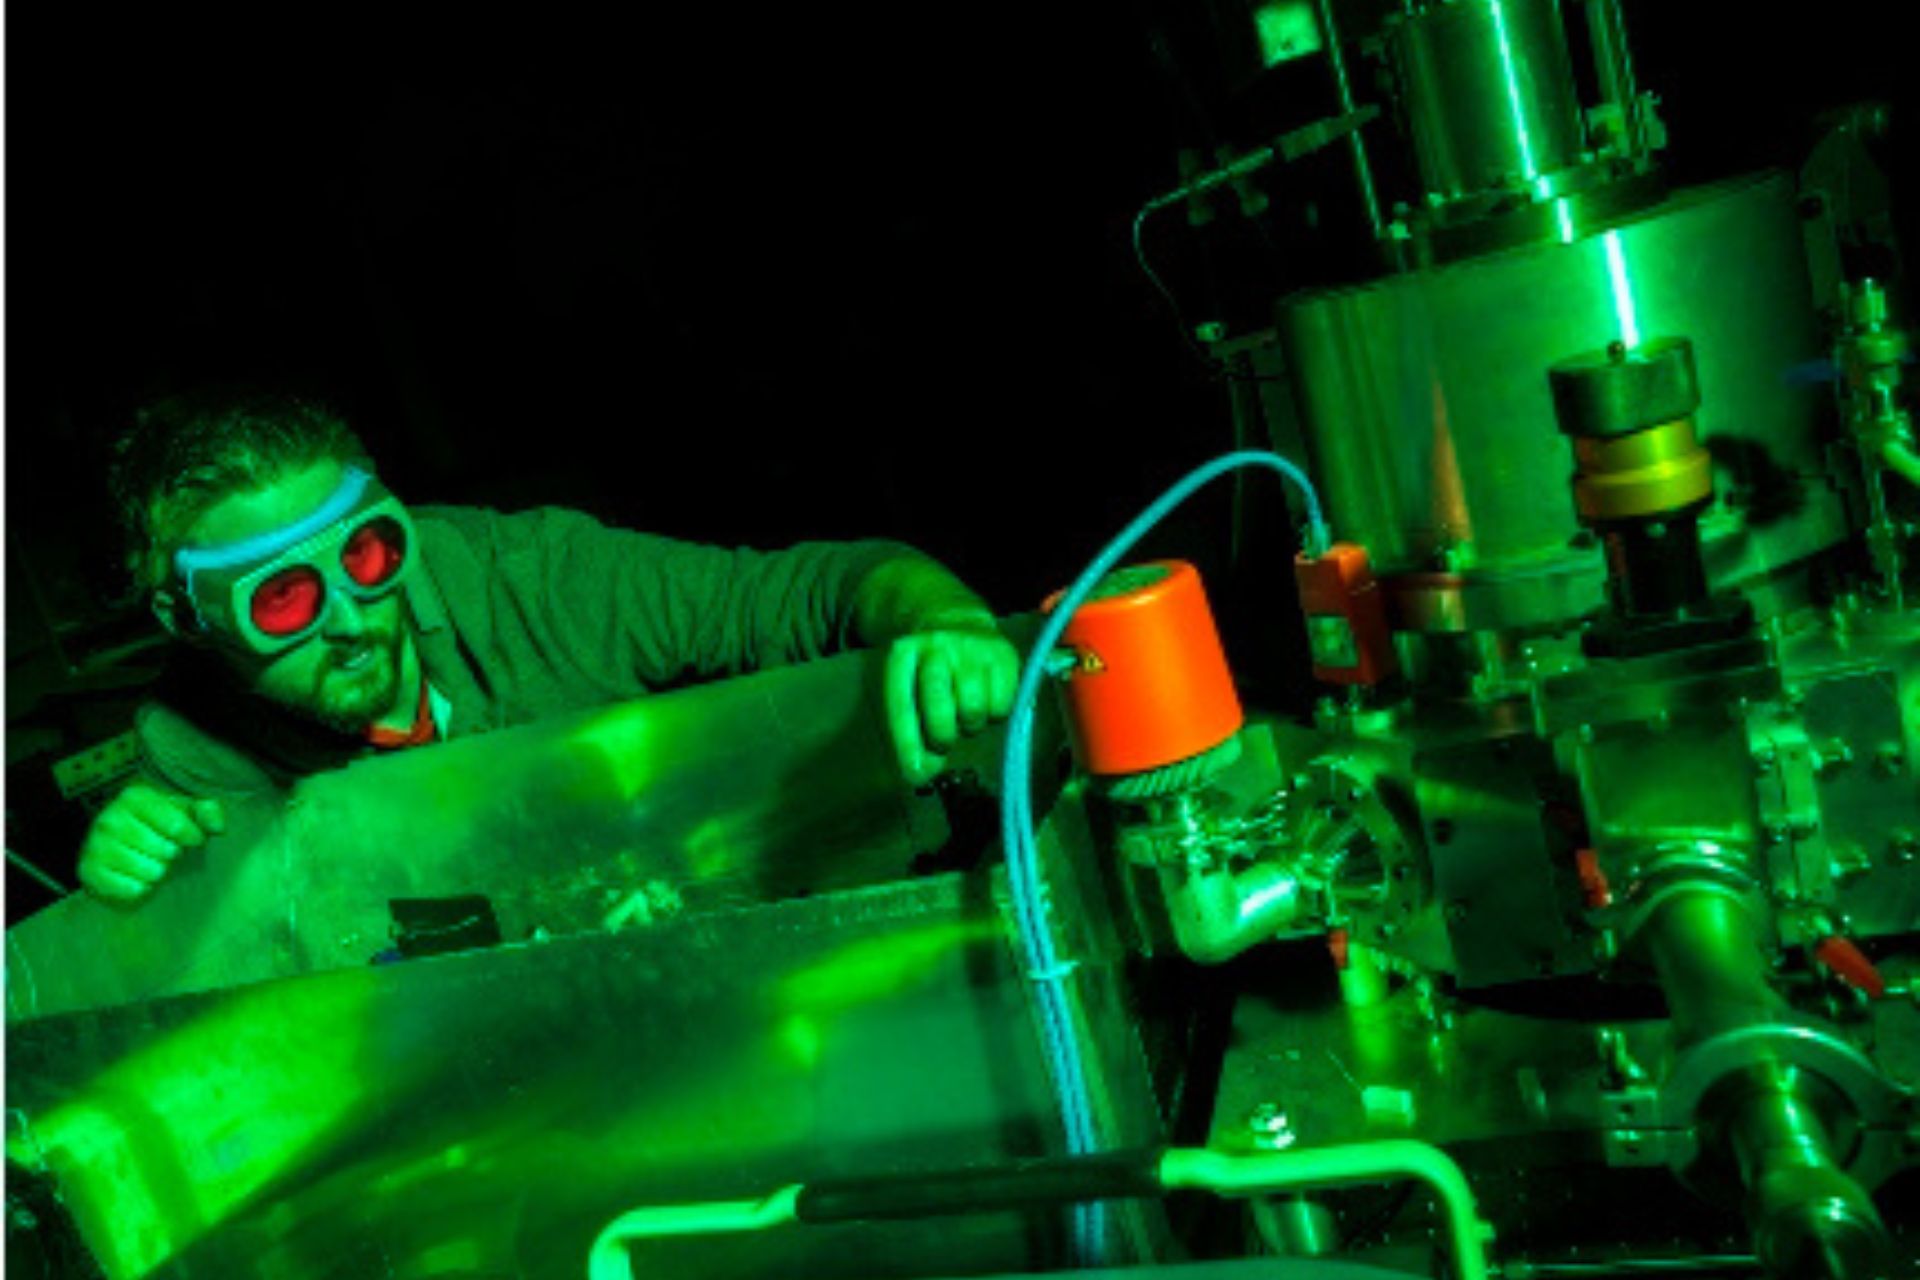 A researcher wearing protective goggles working with machinery bathed in green light